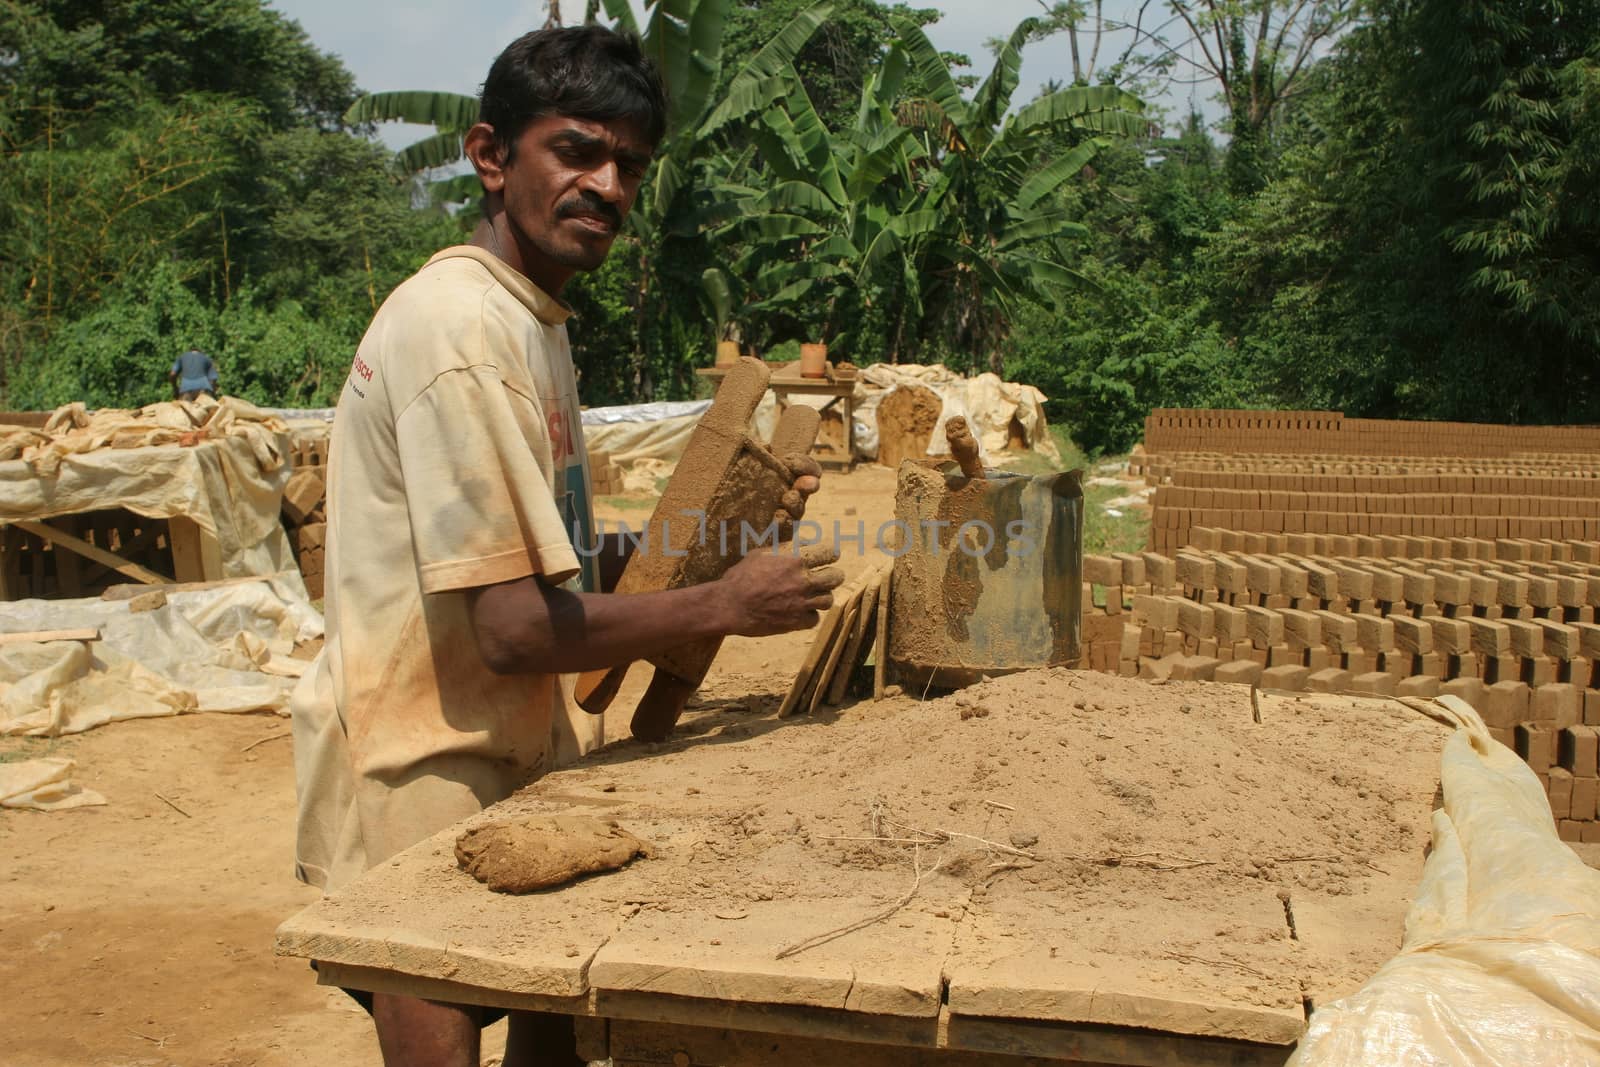 Sri Lanka 4.5.2006 worker shaping mud and clay bricks for manufacture of traditional mud bricks for building. High quality photo